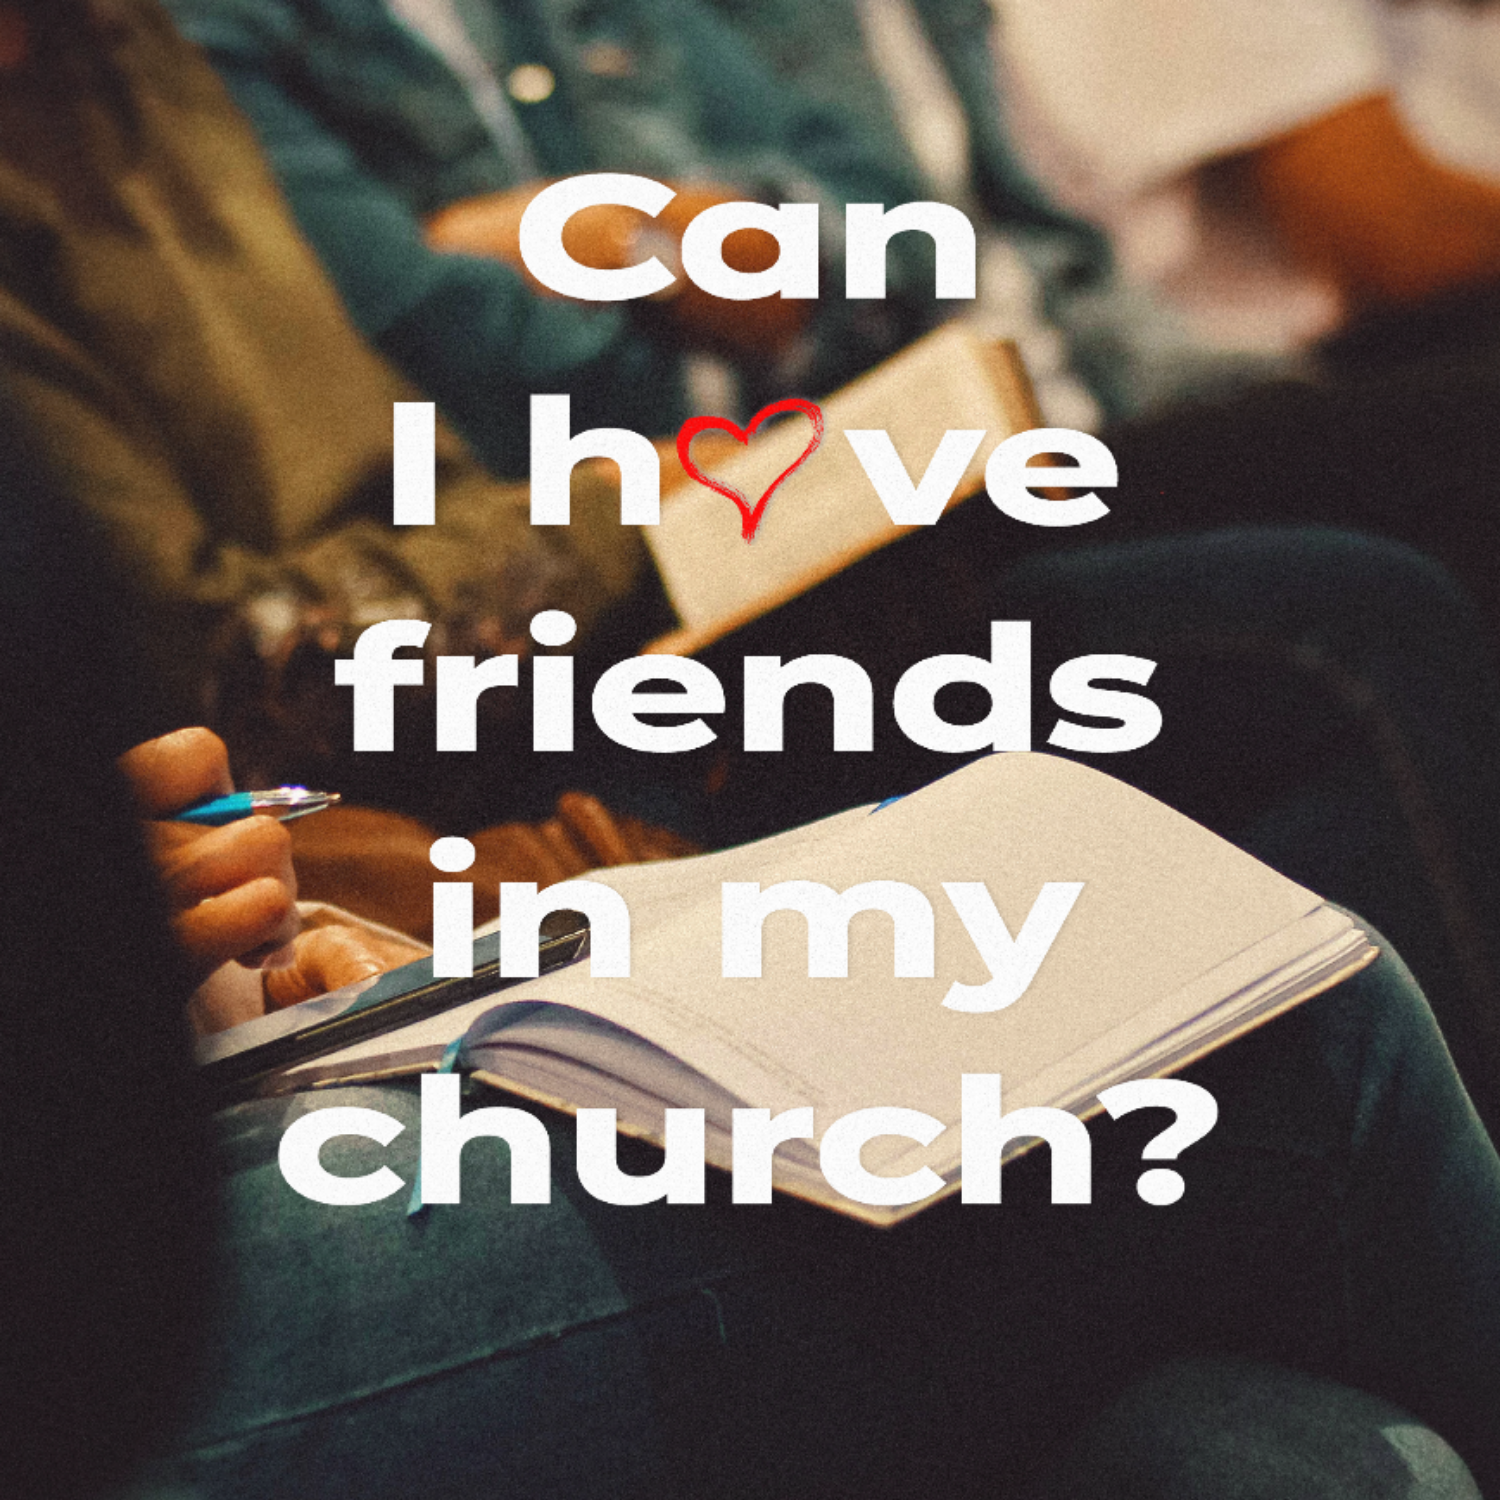 Can a Ministry Wife have Friends in the Church?